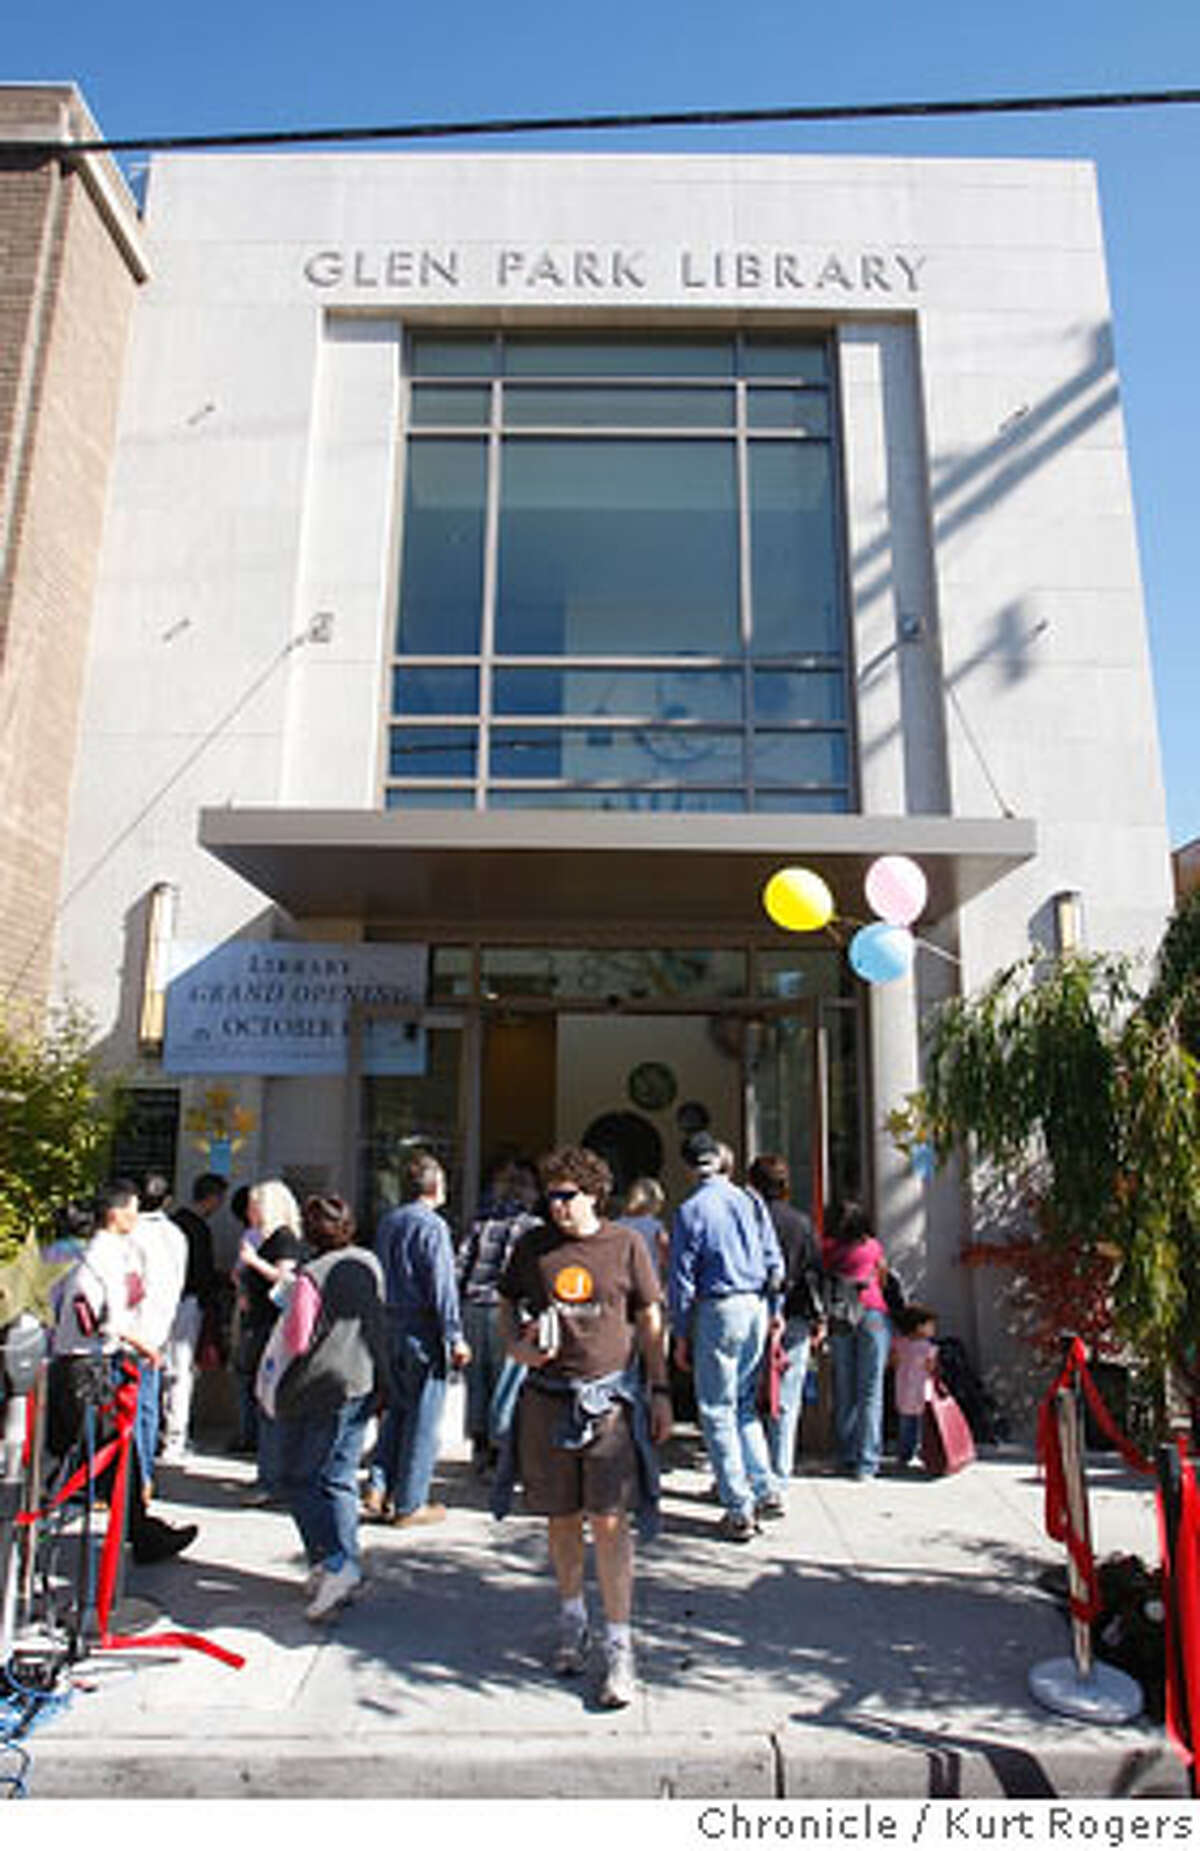 The entrance to the Glen Park Branch Library in San Francisco. Ross Ulbricht, previously known by the pseudonym "Dread Pirate Roberts, was arrested at the library on Tuesday.  Ulbricht was the alleged mastermind behind the online drug marketplace known as Silk Road.